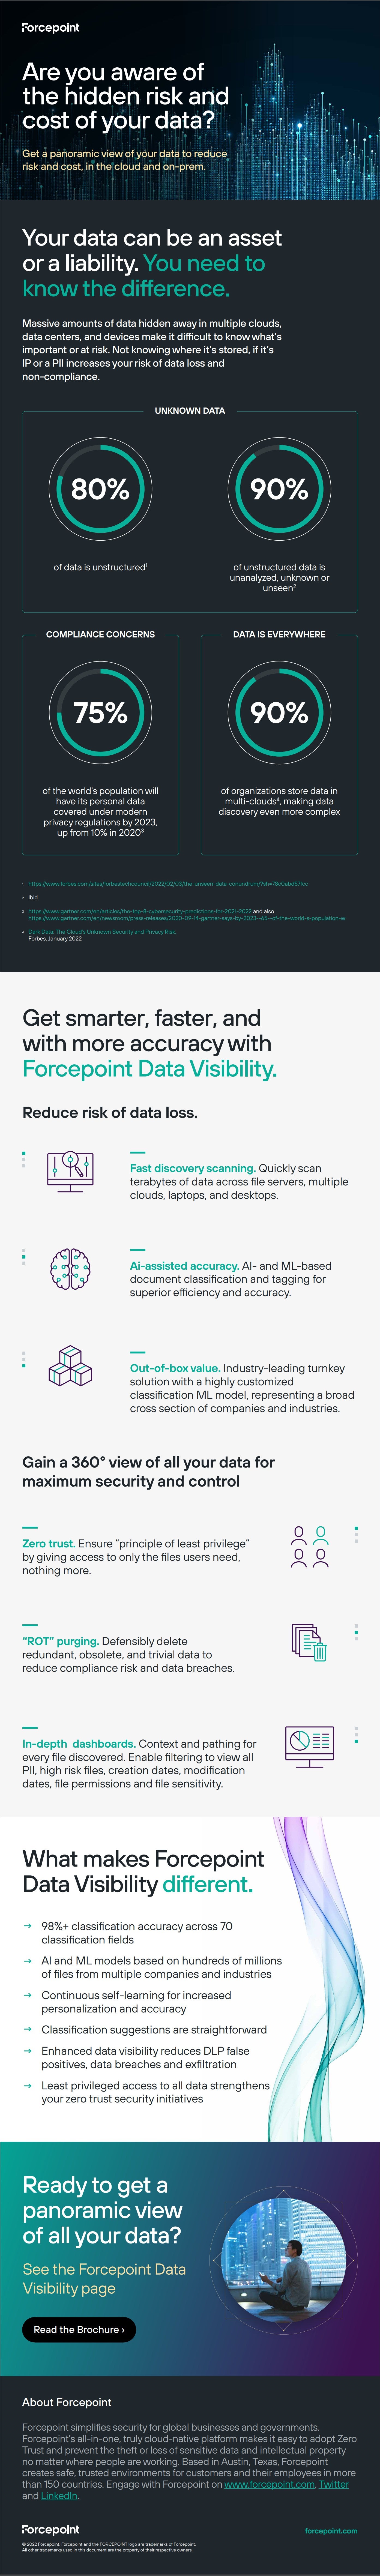 Forcepoint Data Visibility Infographic - Shine a Light on Dark Data